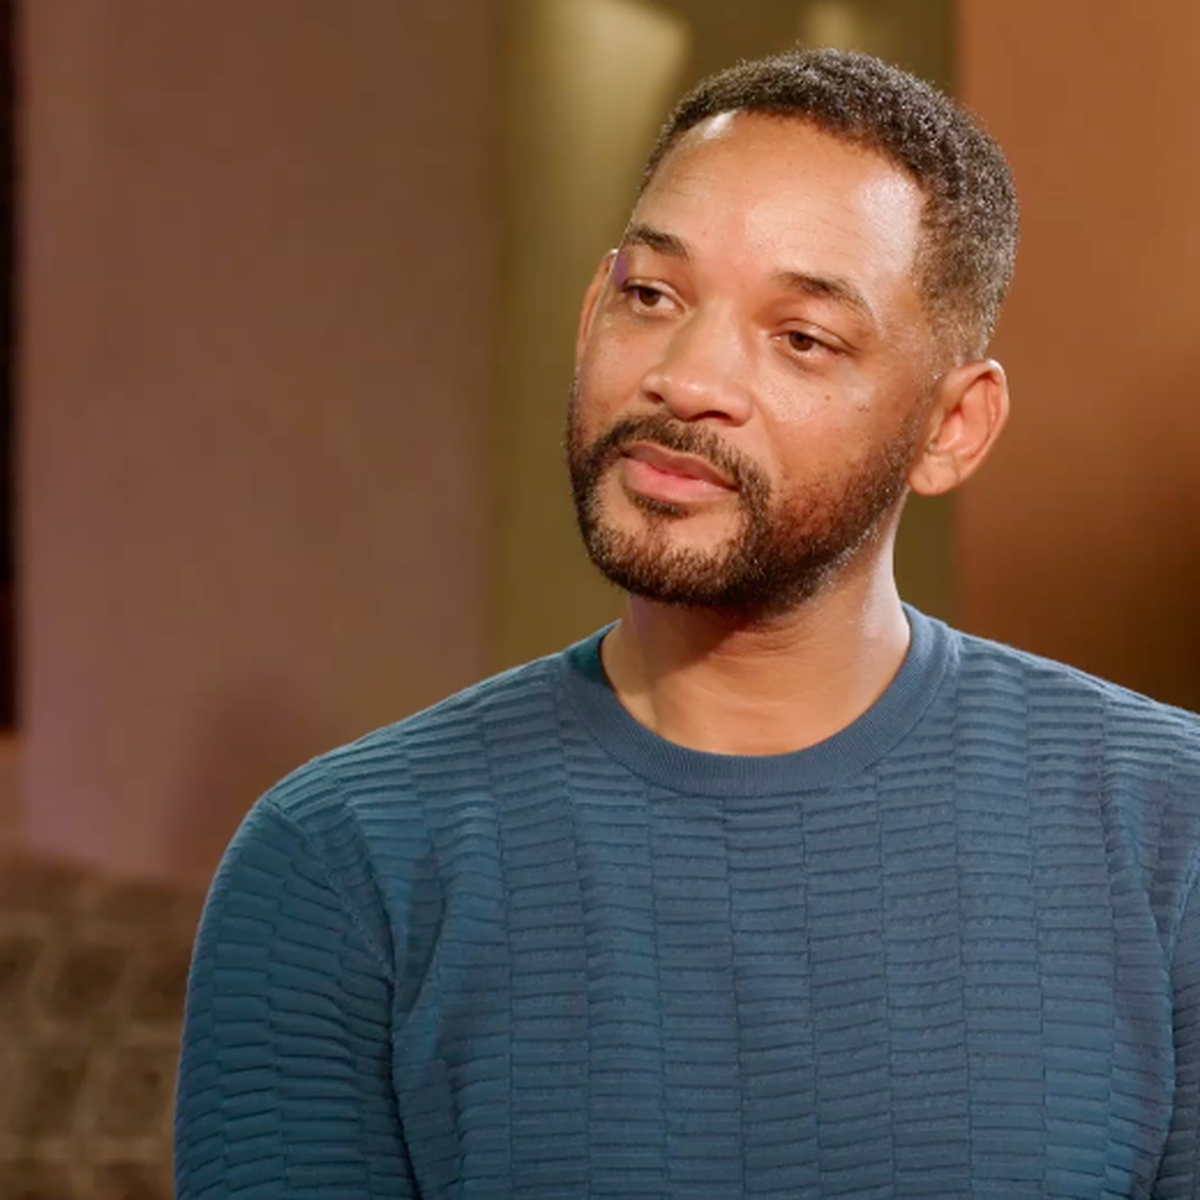 fange manipulere Profet Jada Pinkett Smith and Will Smith's emotional Red Table Talk demonstrates  their business savvy: Column - 9Celebrity